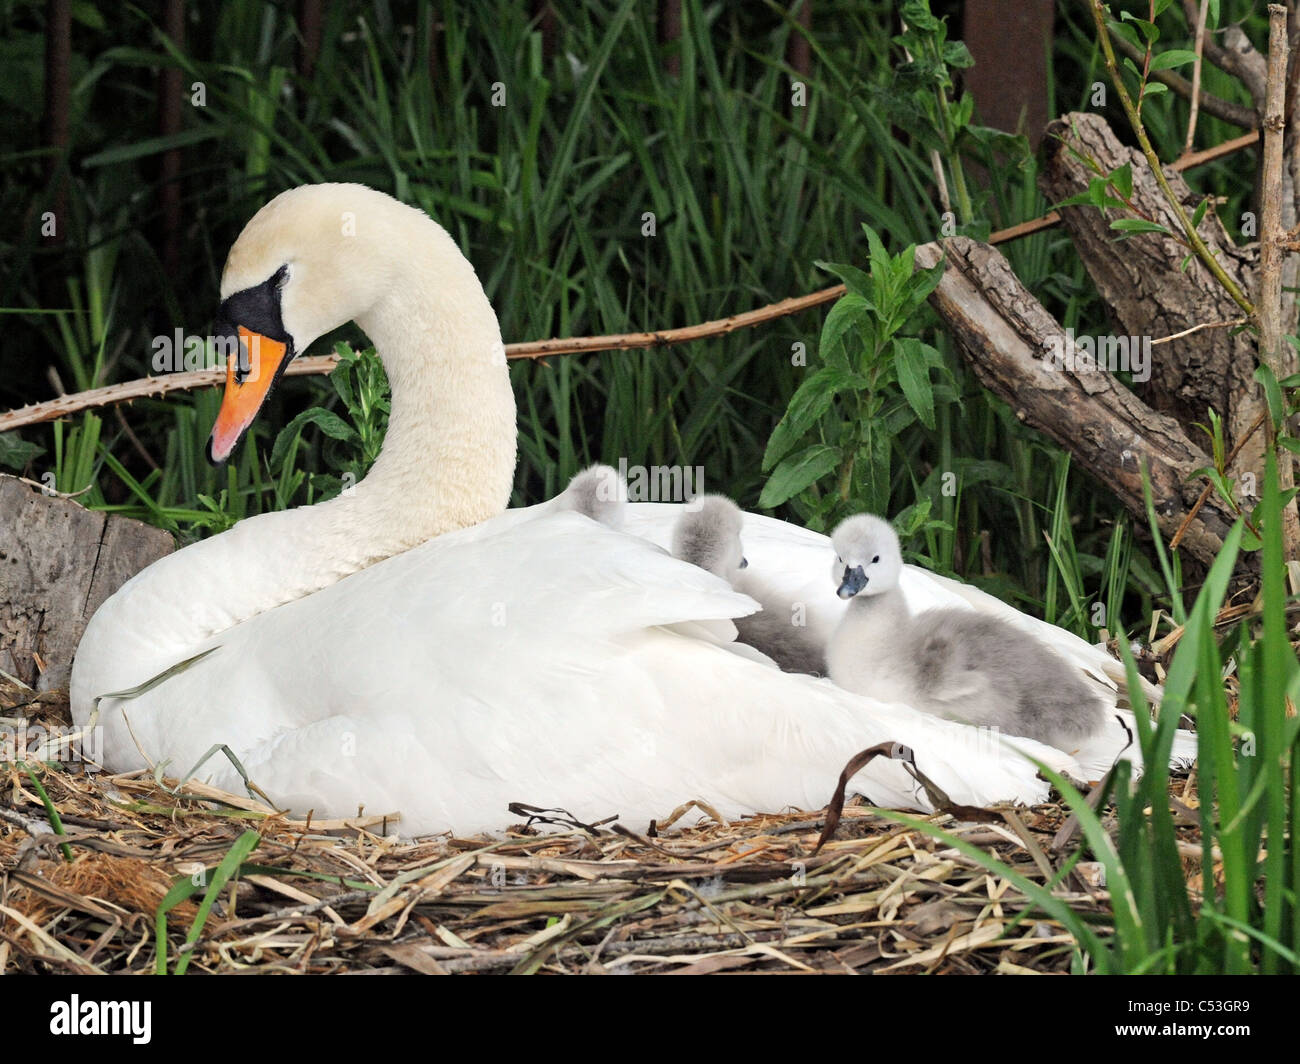 A swan with young cygnets sitting in her wings. Stock Photo